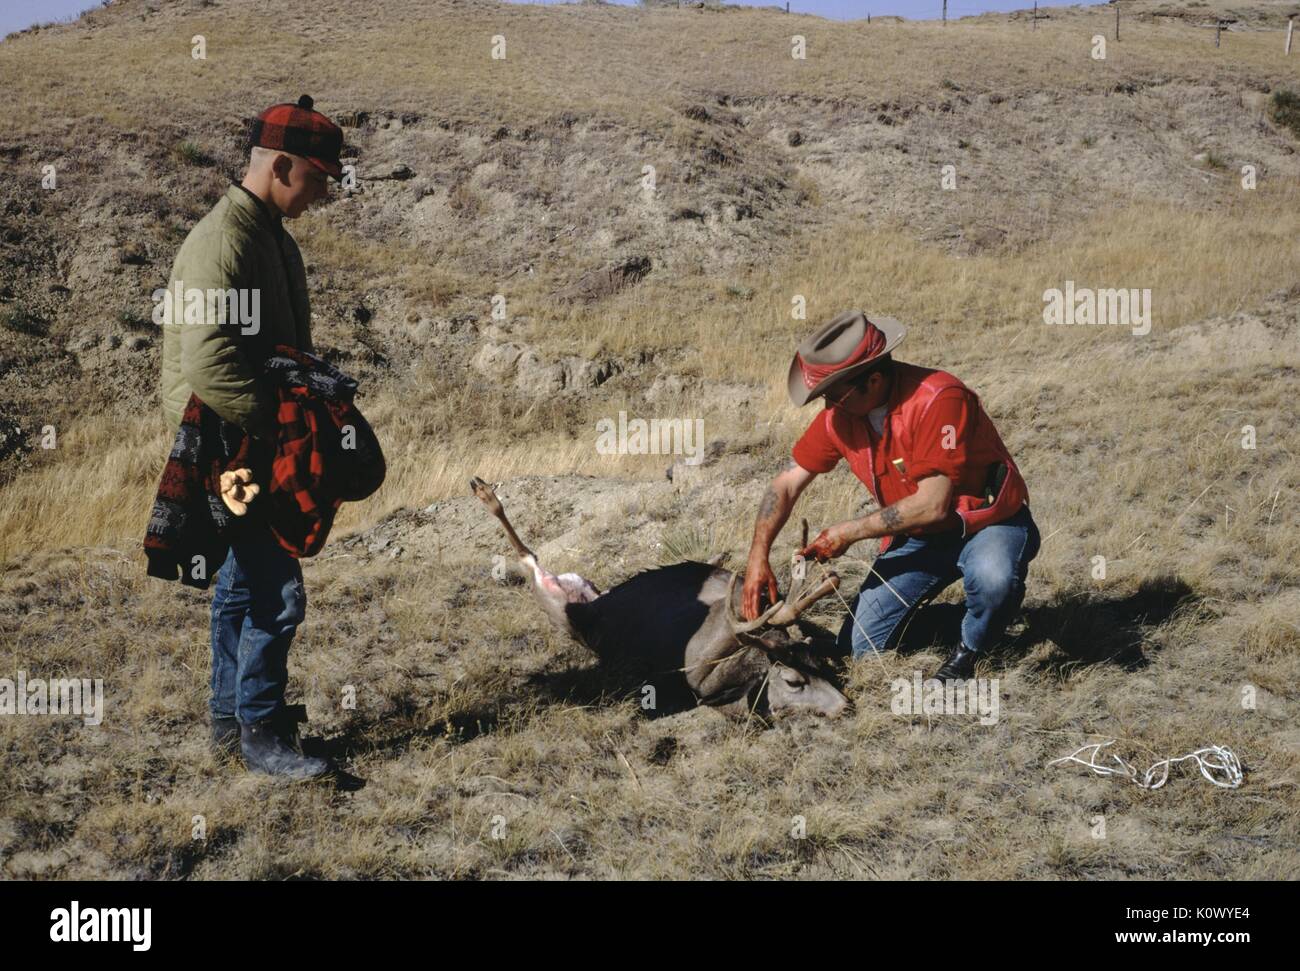 Two hunters in a field, wearing flannel, red shirts, jeans and cowboy hat, dressing the carcass of a dead deer, shot during their hunt, one man using twine to bind the legs of the deer, blood visible on his hands, 1971. Photo credit Smith Collection/Gado/Getty Images. Stock Photo